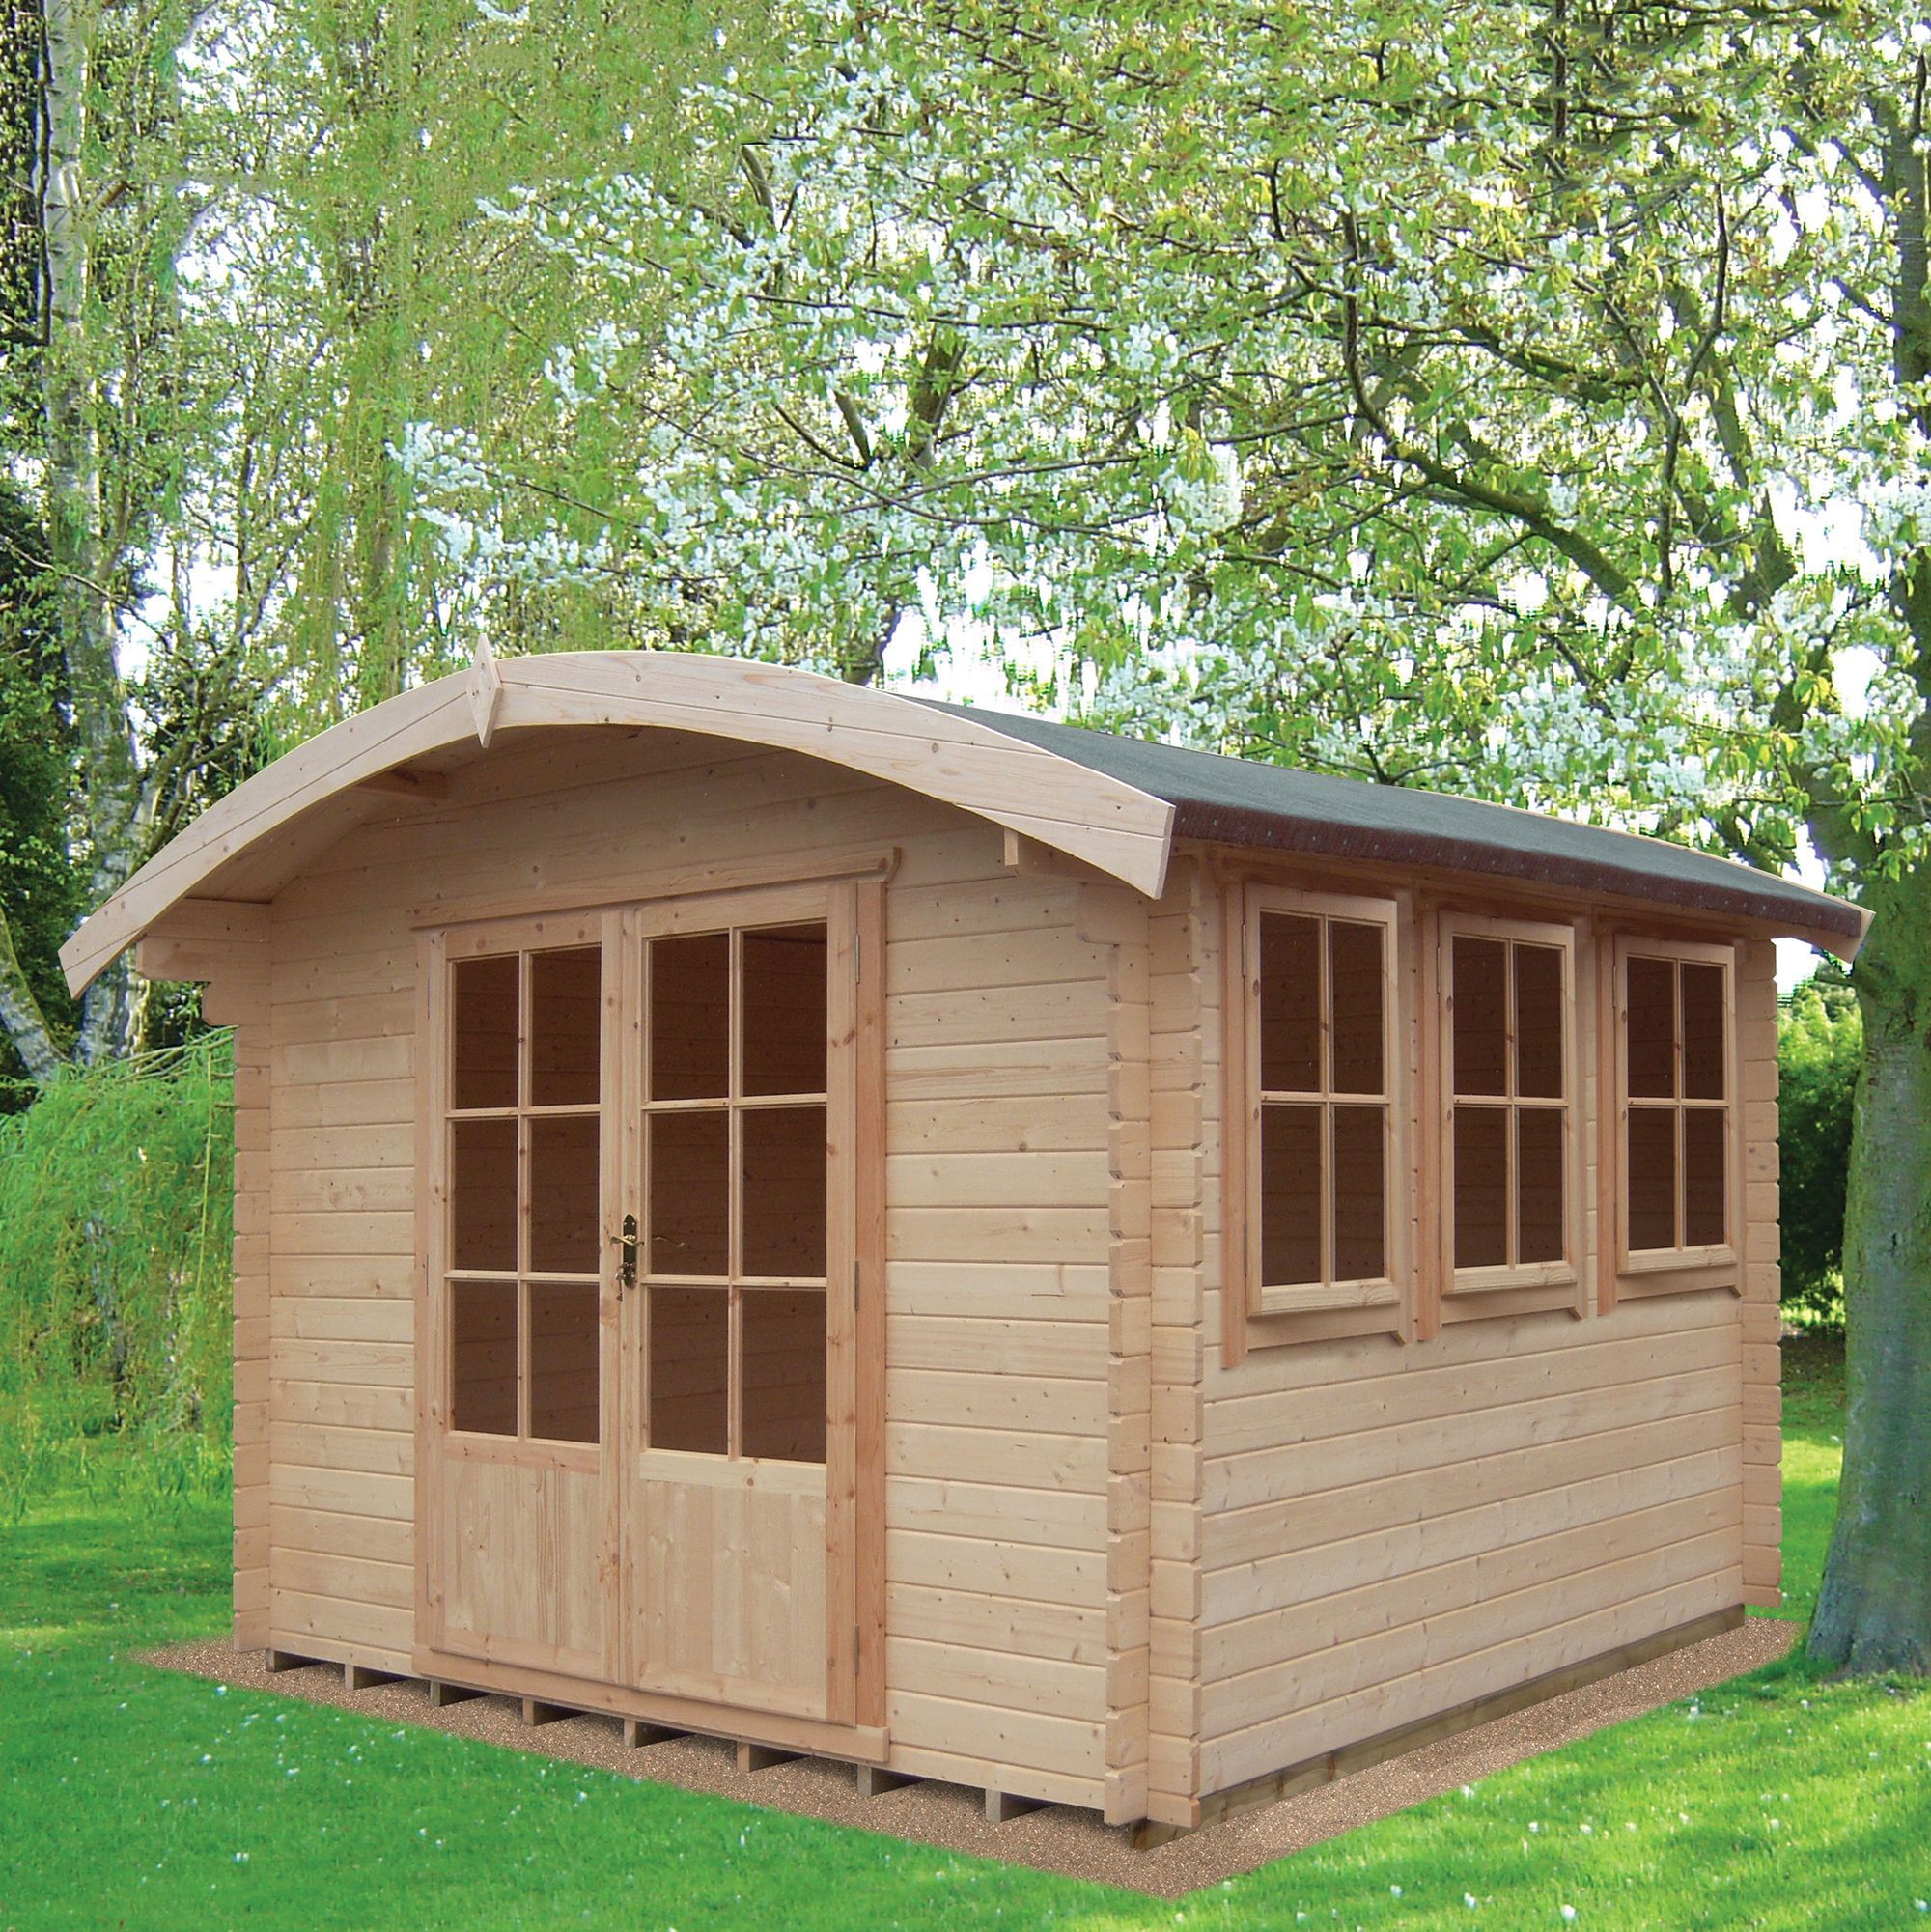 Shire Kilburn 10x12 ft Toughened glass & 3 windows Curved Wooden Cabin - Assembly service included